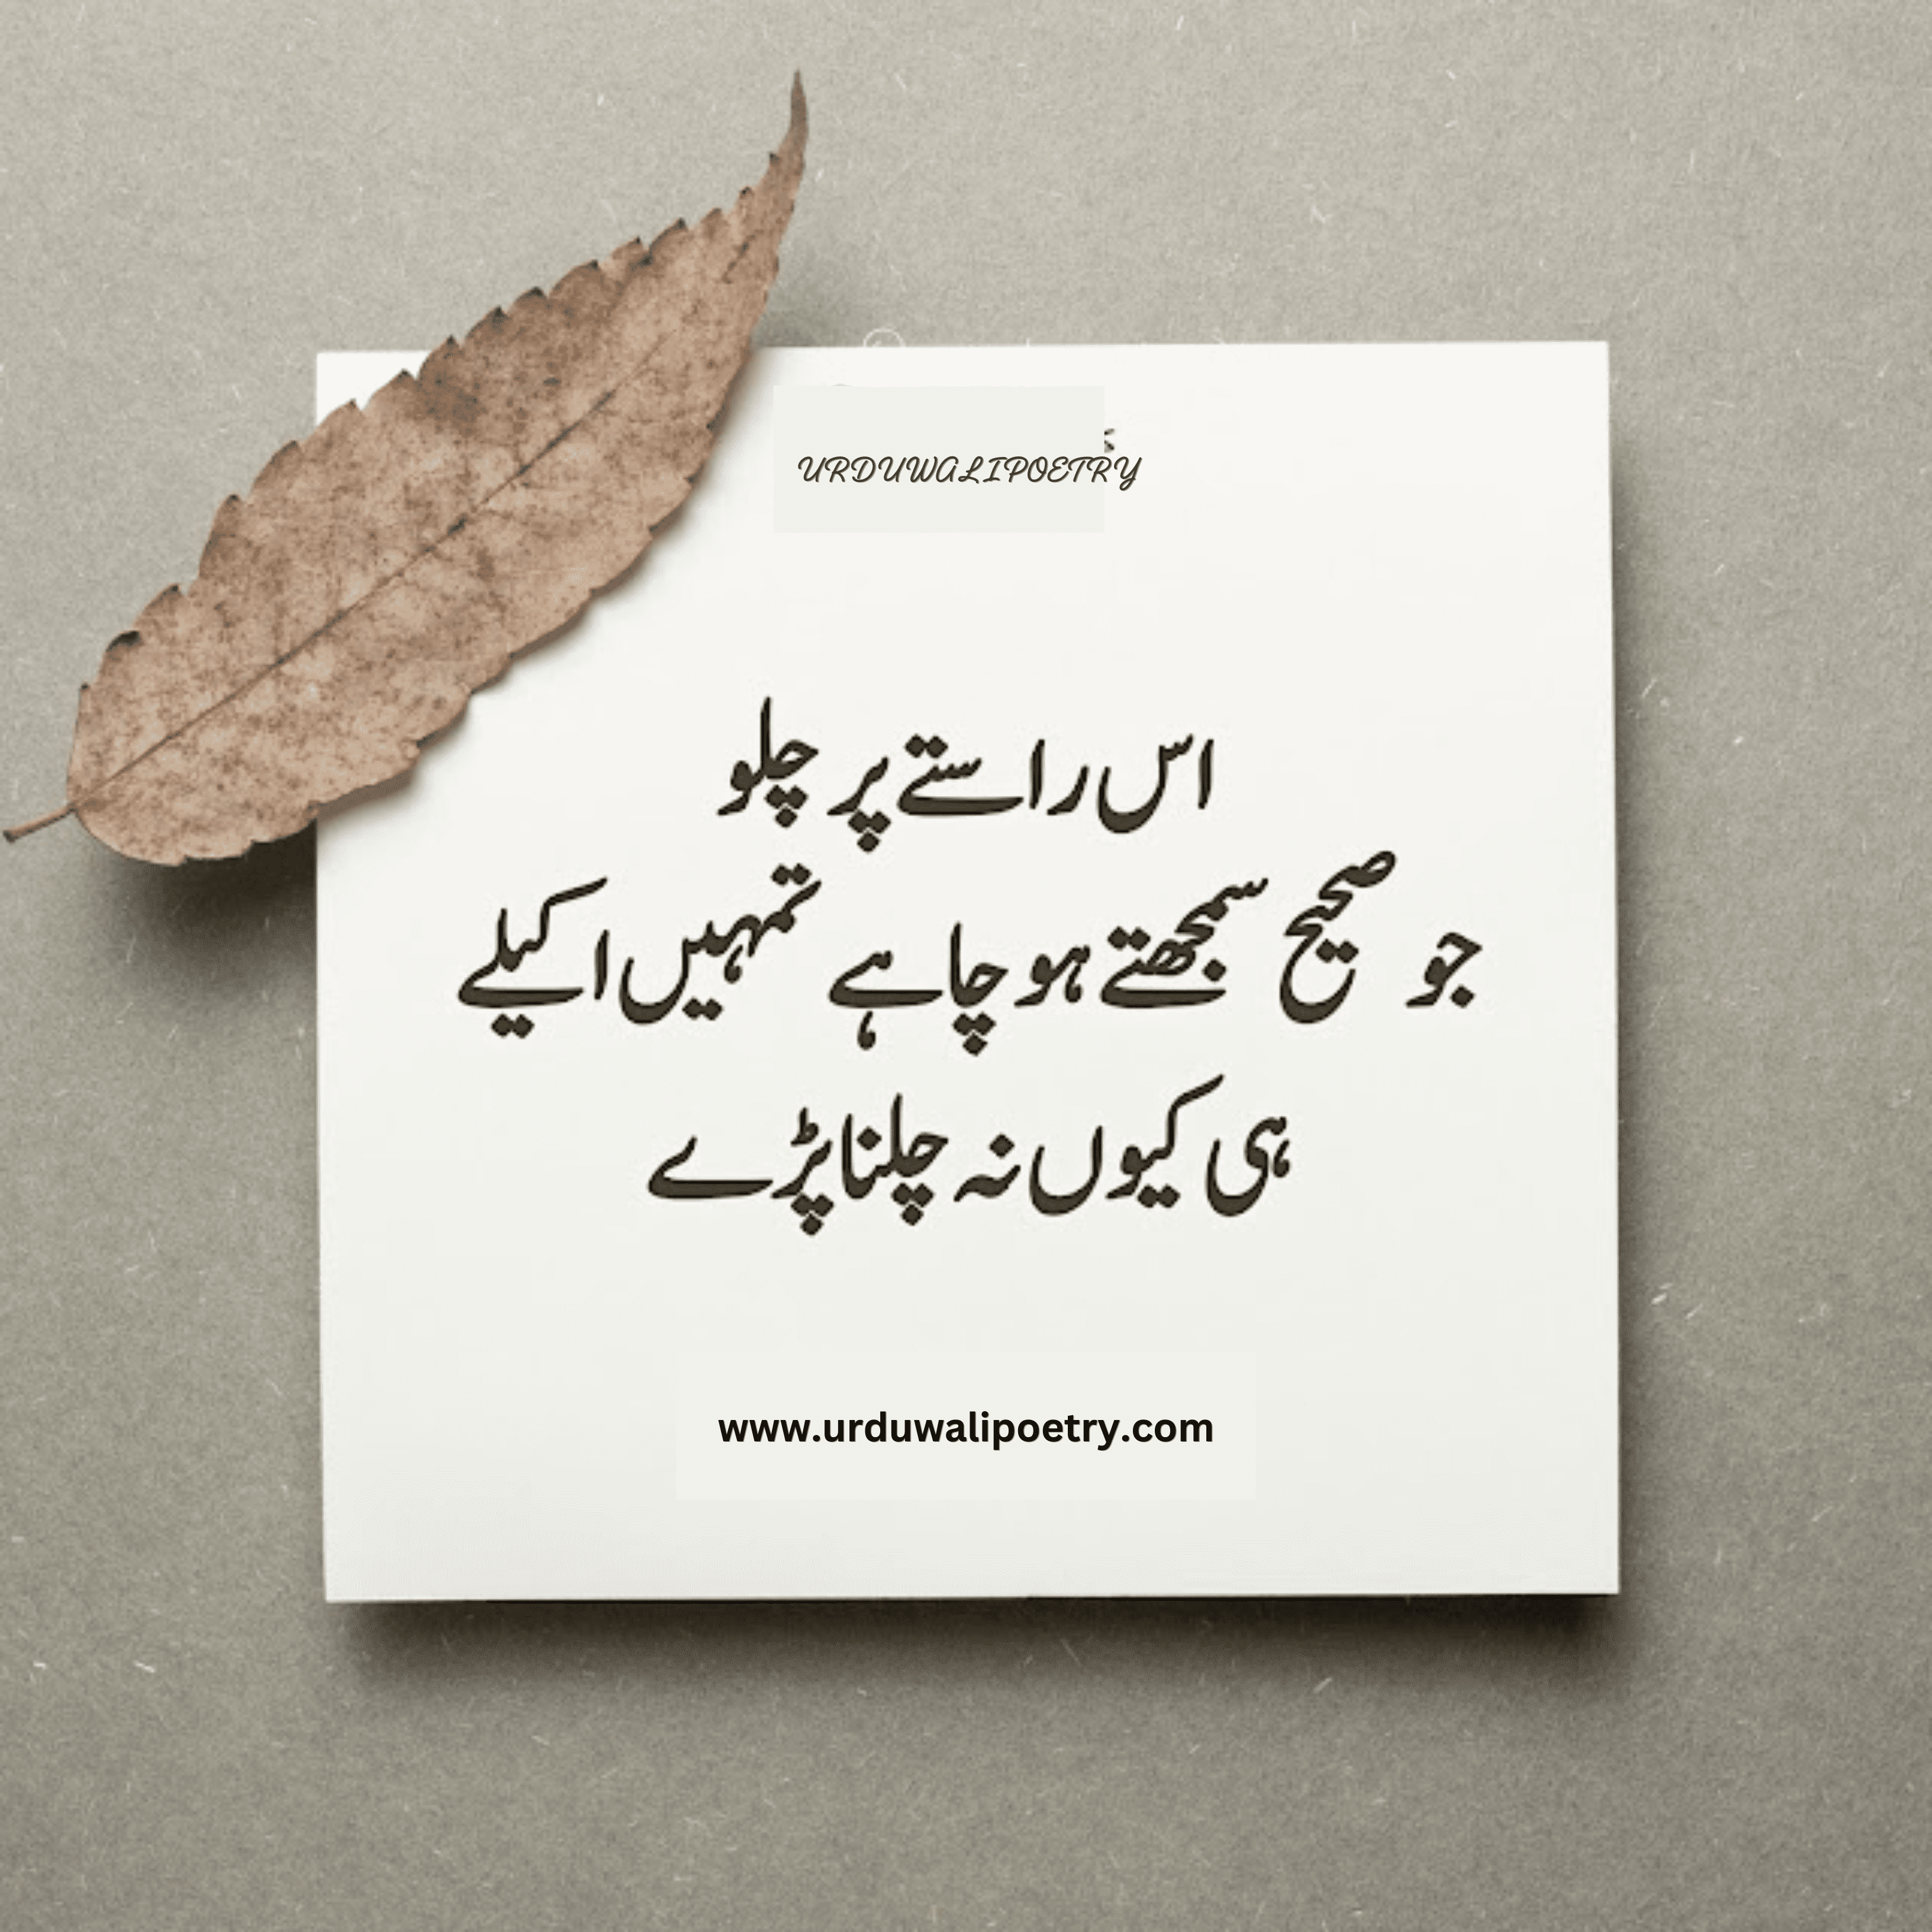 Motivational Quotes in Urdu About Life | Wisdom Quotes | Deep Quotes